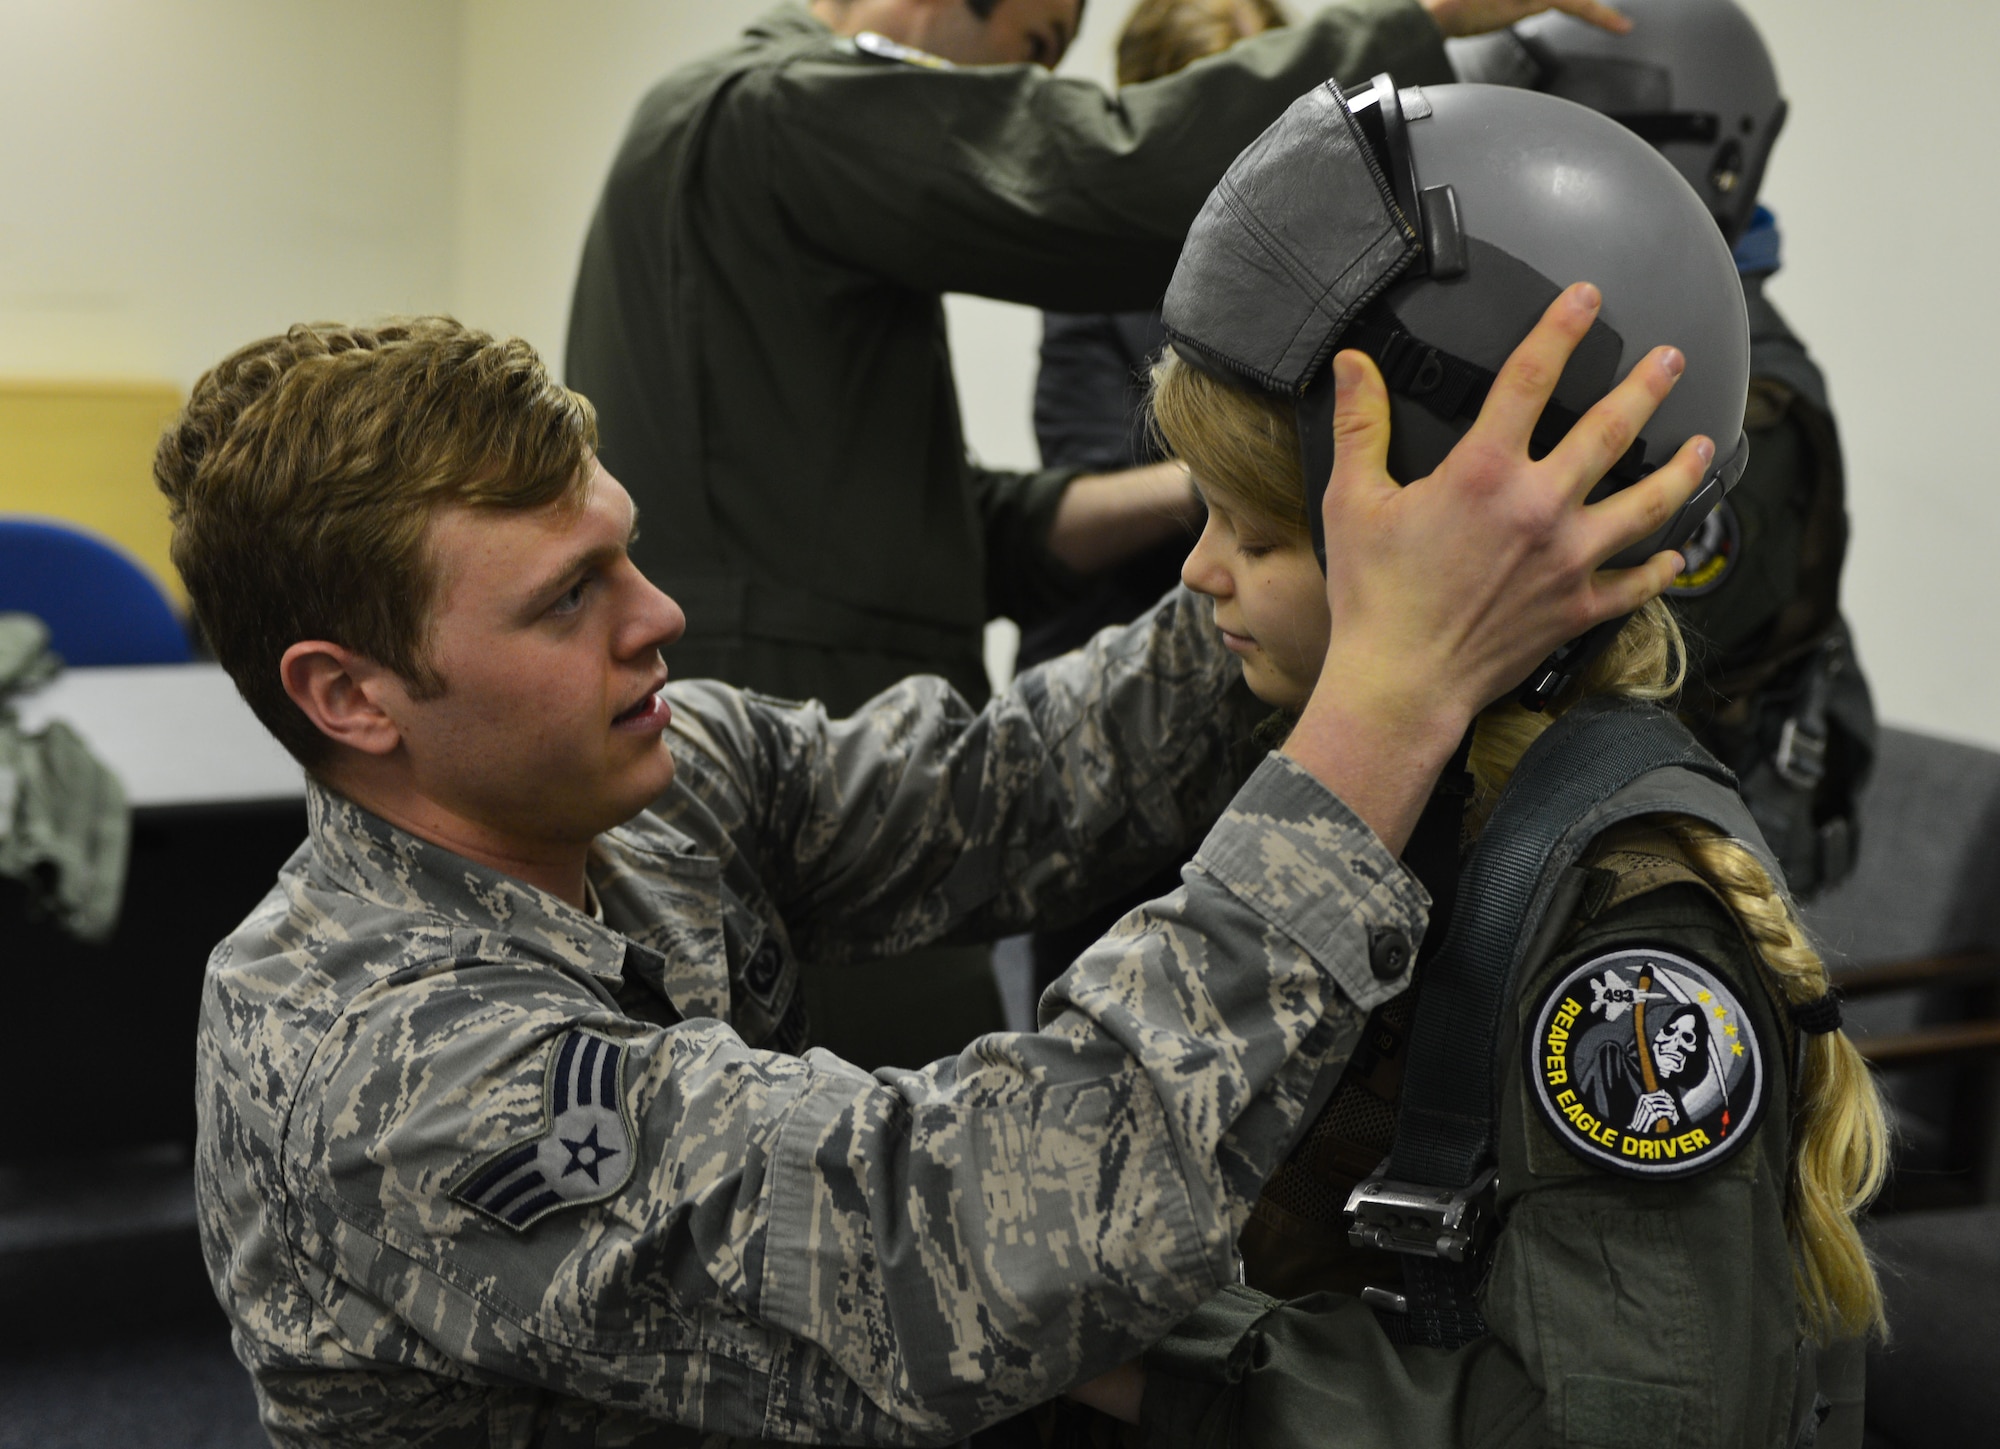 U.S. Air Force Senior Airman Justin Bishop, 871st Air Expeditionary Squadron aircrew flight equipment section, fits Arna Tryggvadóttir with a helmet during the Pilot for a Day program at Keflavik International Airport, Iceland, May 13, 2015.The 871st AES hosted two children, who were fitted with aircrew flight equipment as part of the day-long program.(U.S. Air Force photo by 2nd Lt. Meredith Mulvihill/Released)